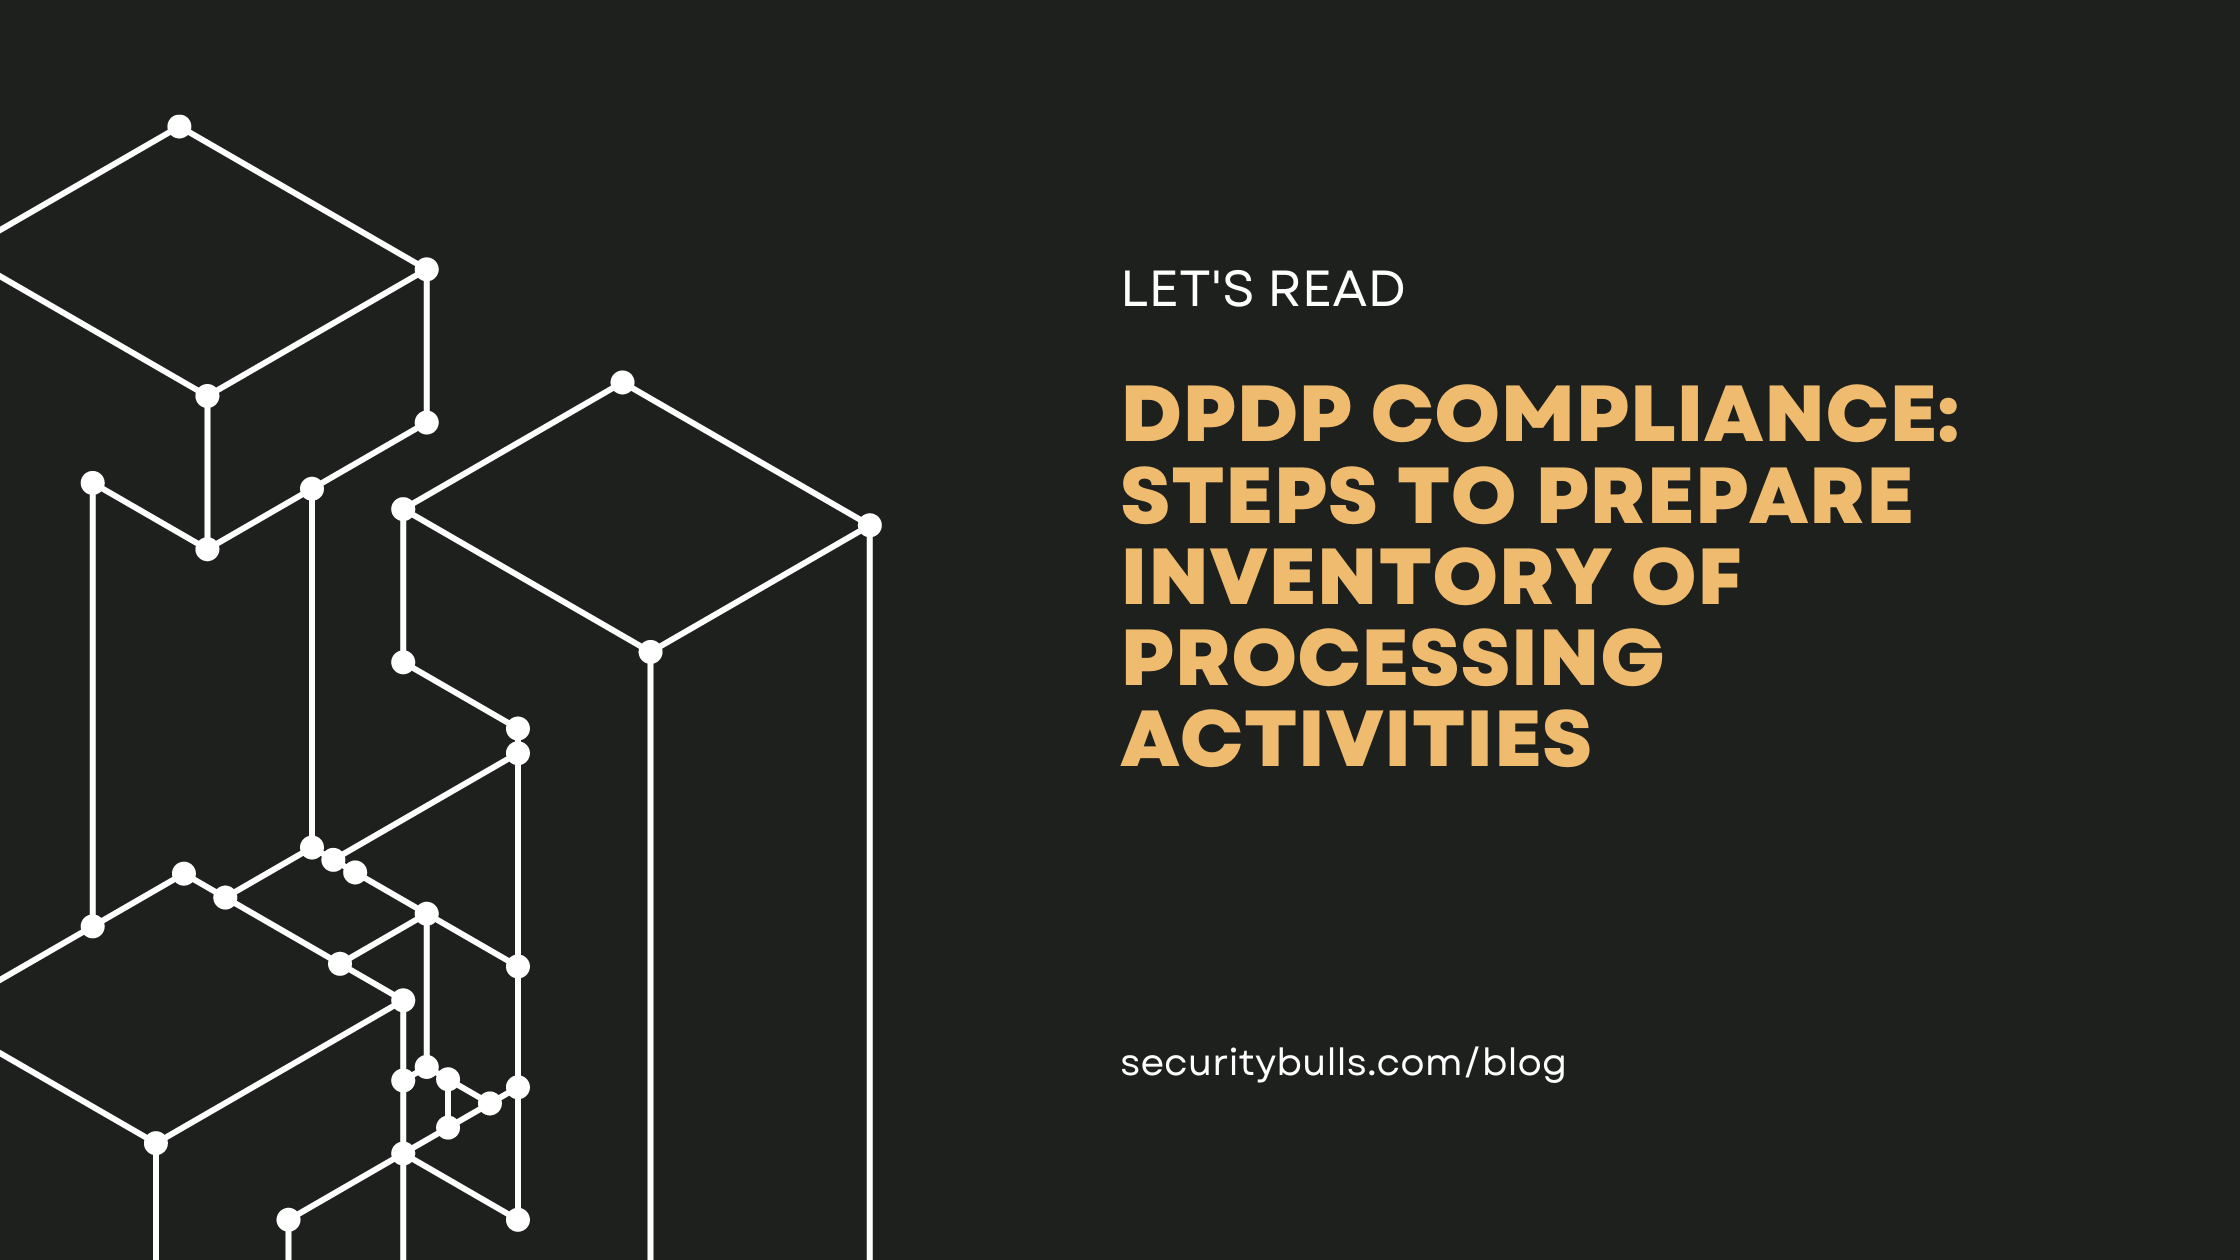 DPDP Compliance: Steps to Prepare Inventory of Processing Activities